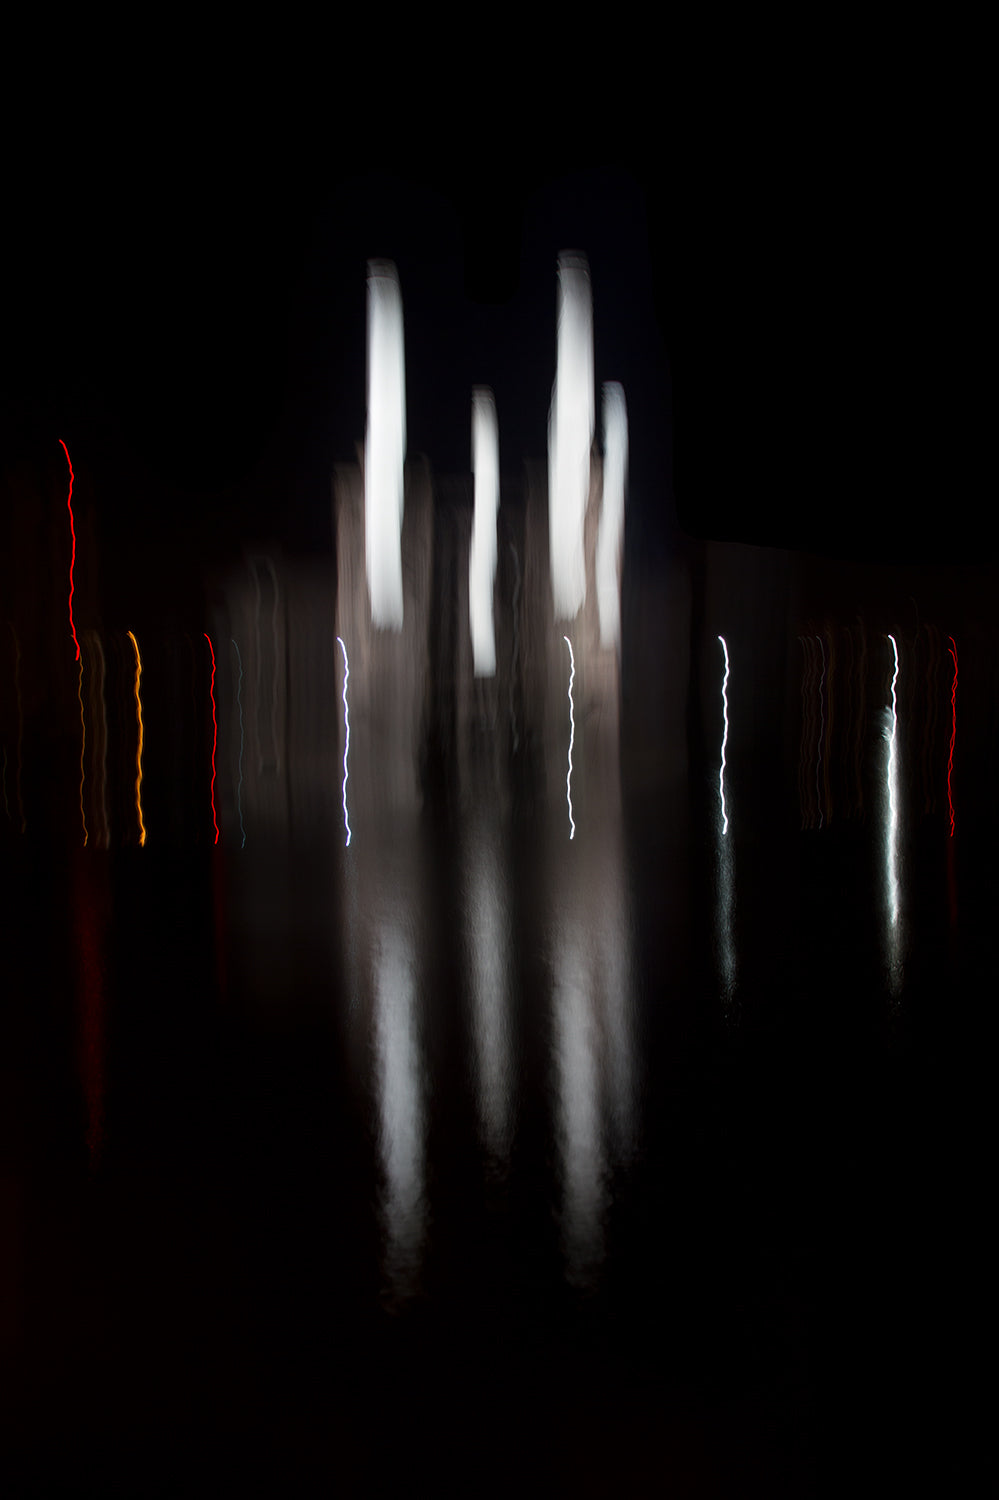 An abstract impression of the iconic Battersea Power Station illuminated at night on a still September evening